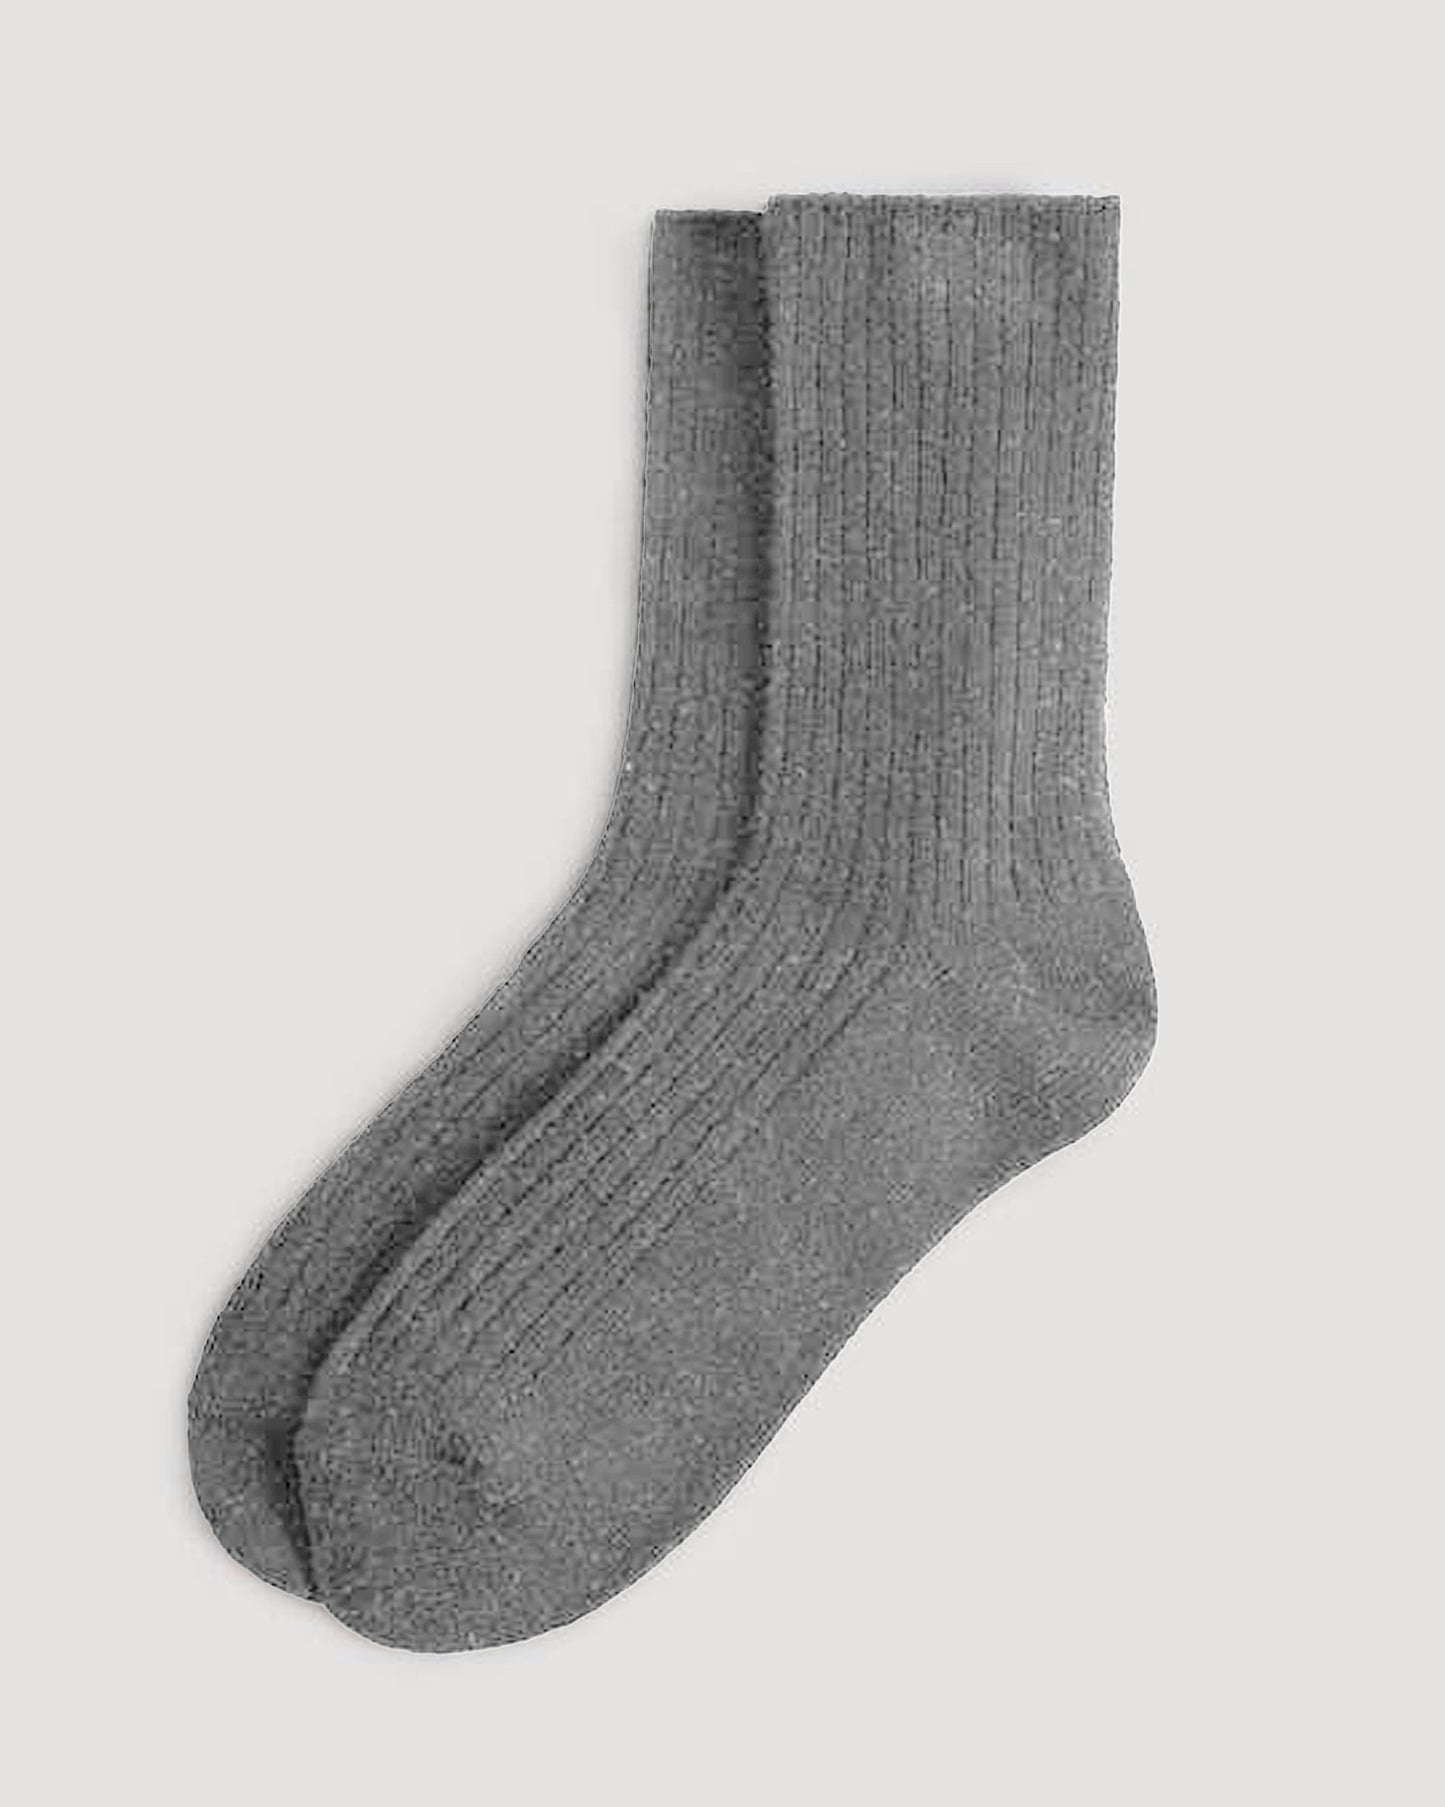 Ysabel Mora 12853 No Cuff Wool Sock - Light grey soft and warm wool ribbed knitted thermal socks with no cuff, shaped heel and flat toe seam.